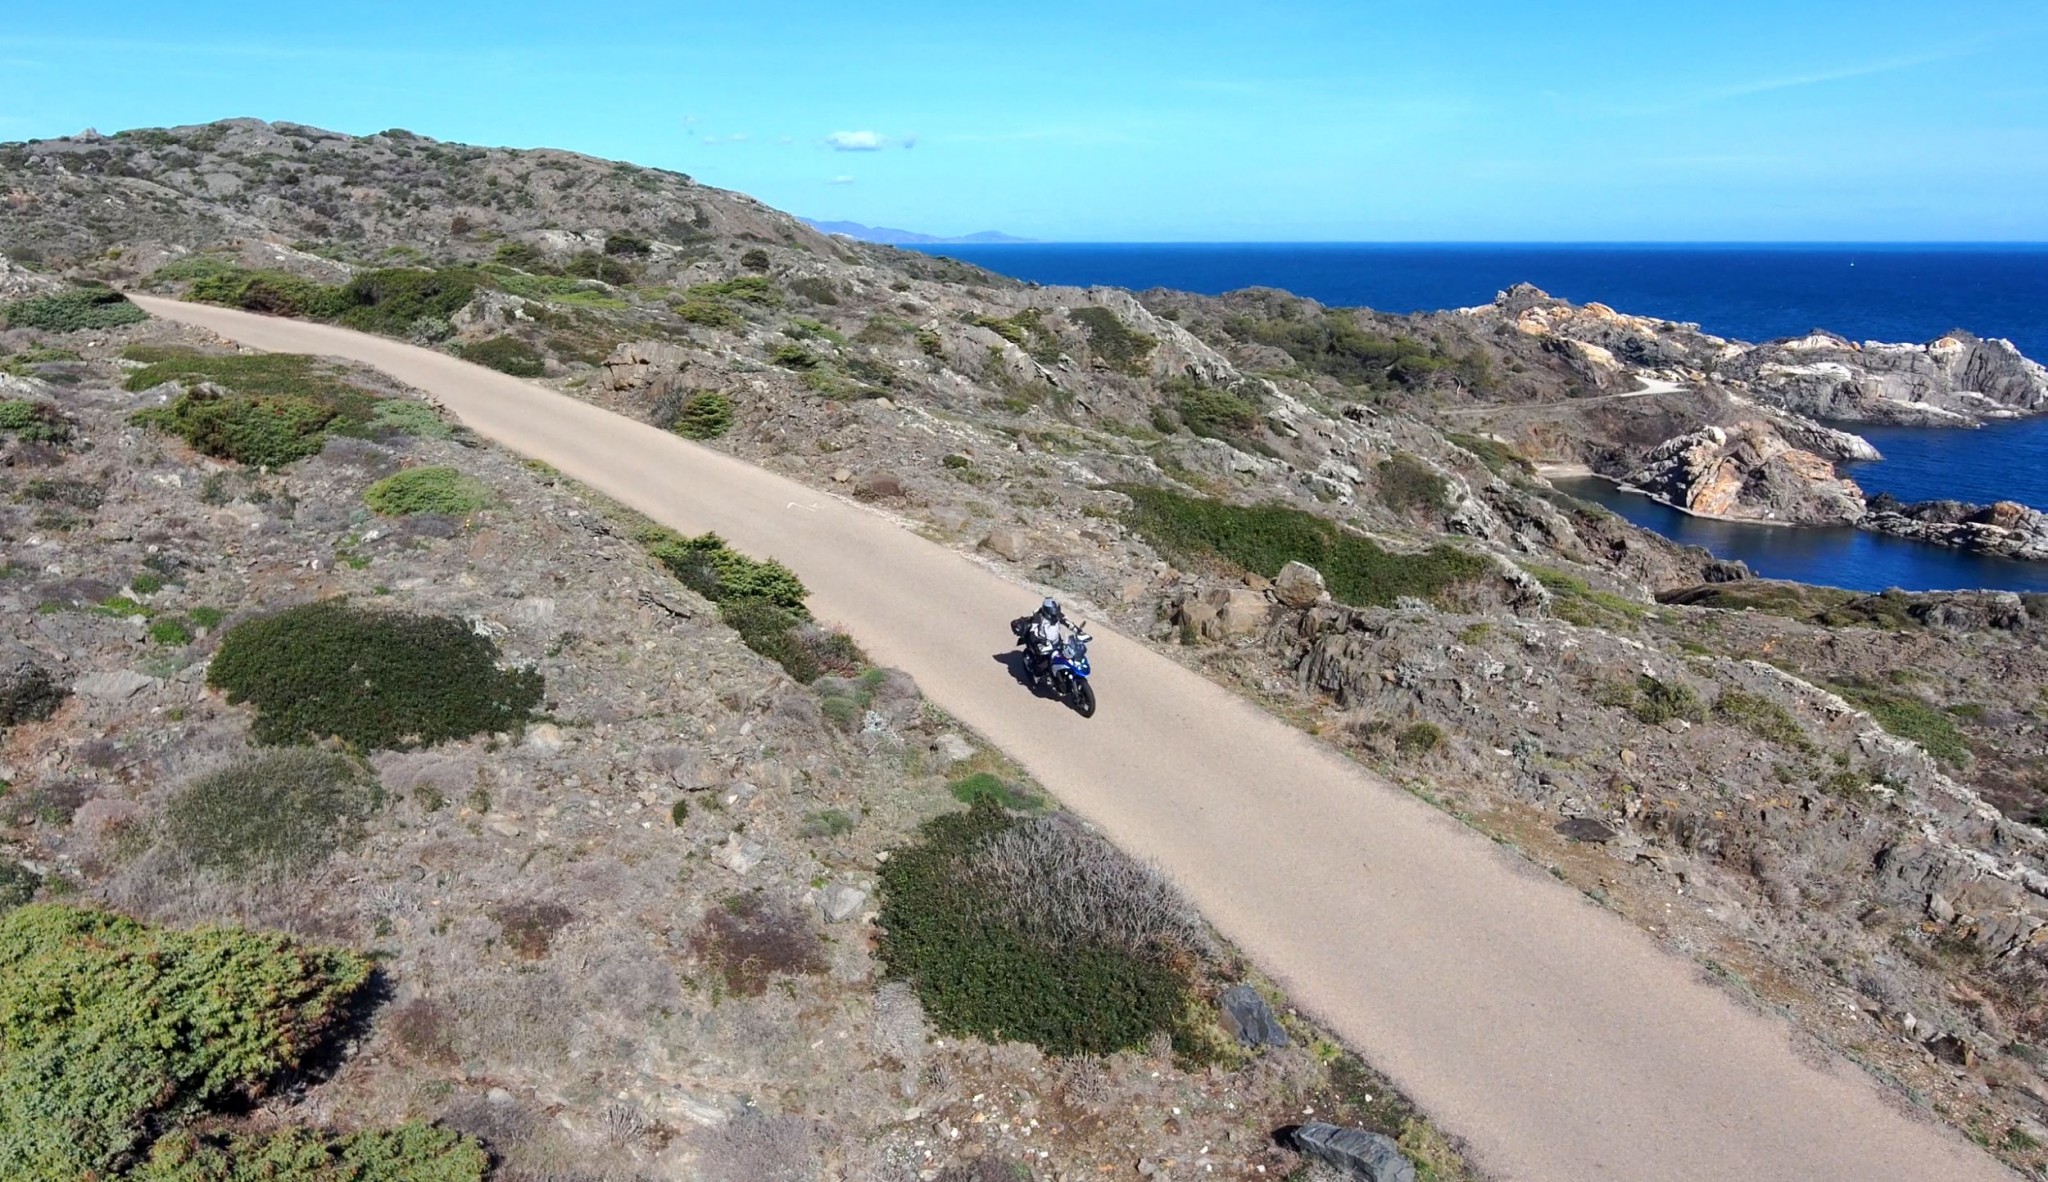 BMW R 1300 GS road test - from Barcelona to Vienna - Image 11